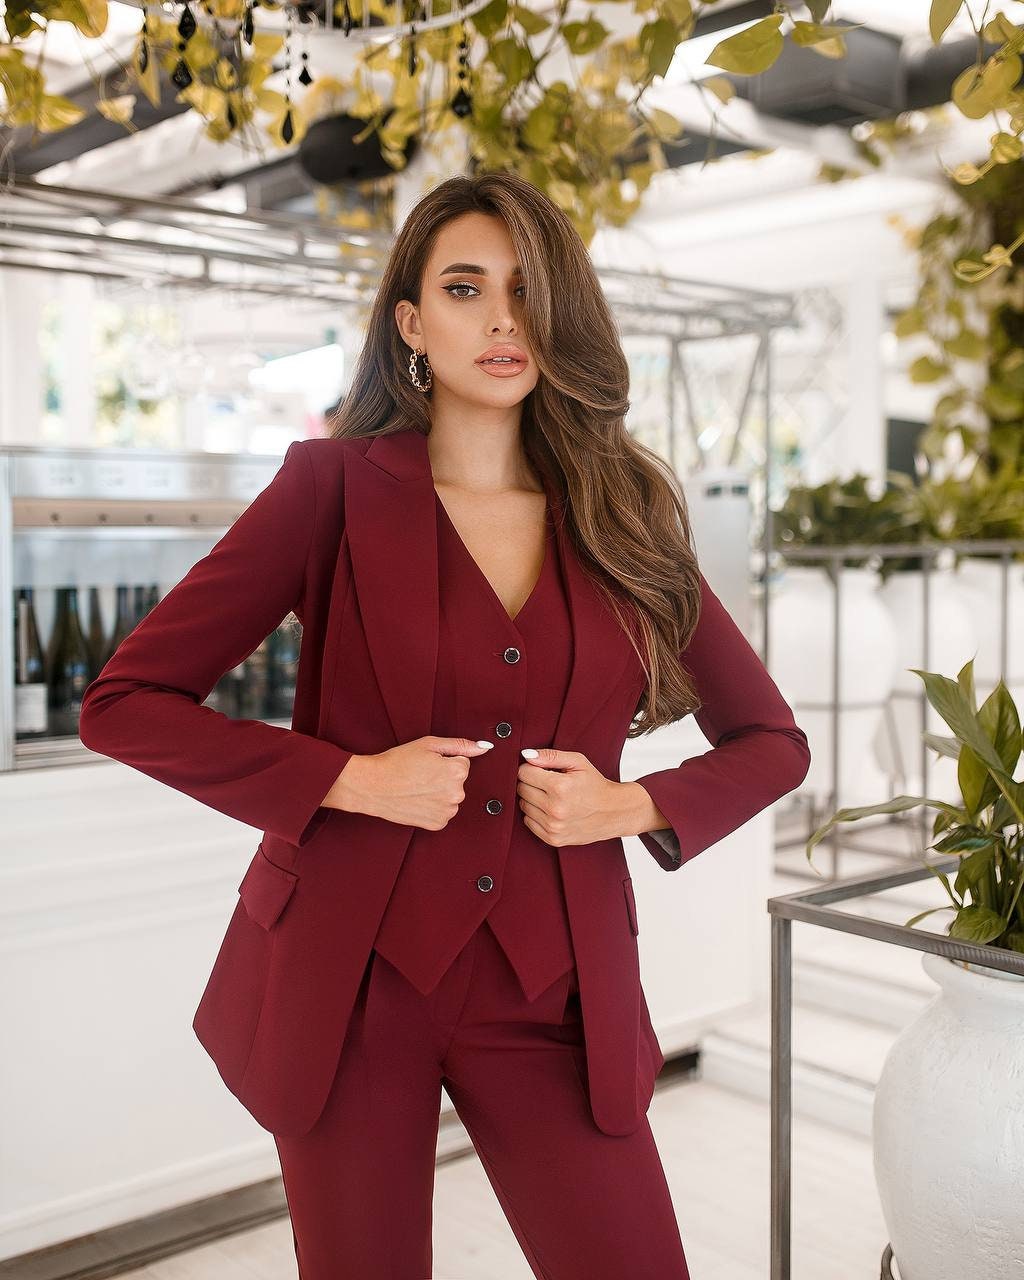 Buy Women Two Piece Suit /two Piece Suit/top/womens Suit/womens Suit  Set/wedding Suit/ Womens Coats Suit Set. Online in India - Etsy | Business  attire women, Formal business attire, Professional outfits